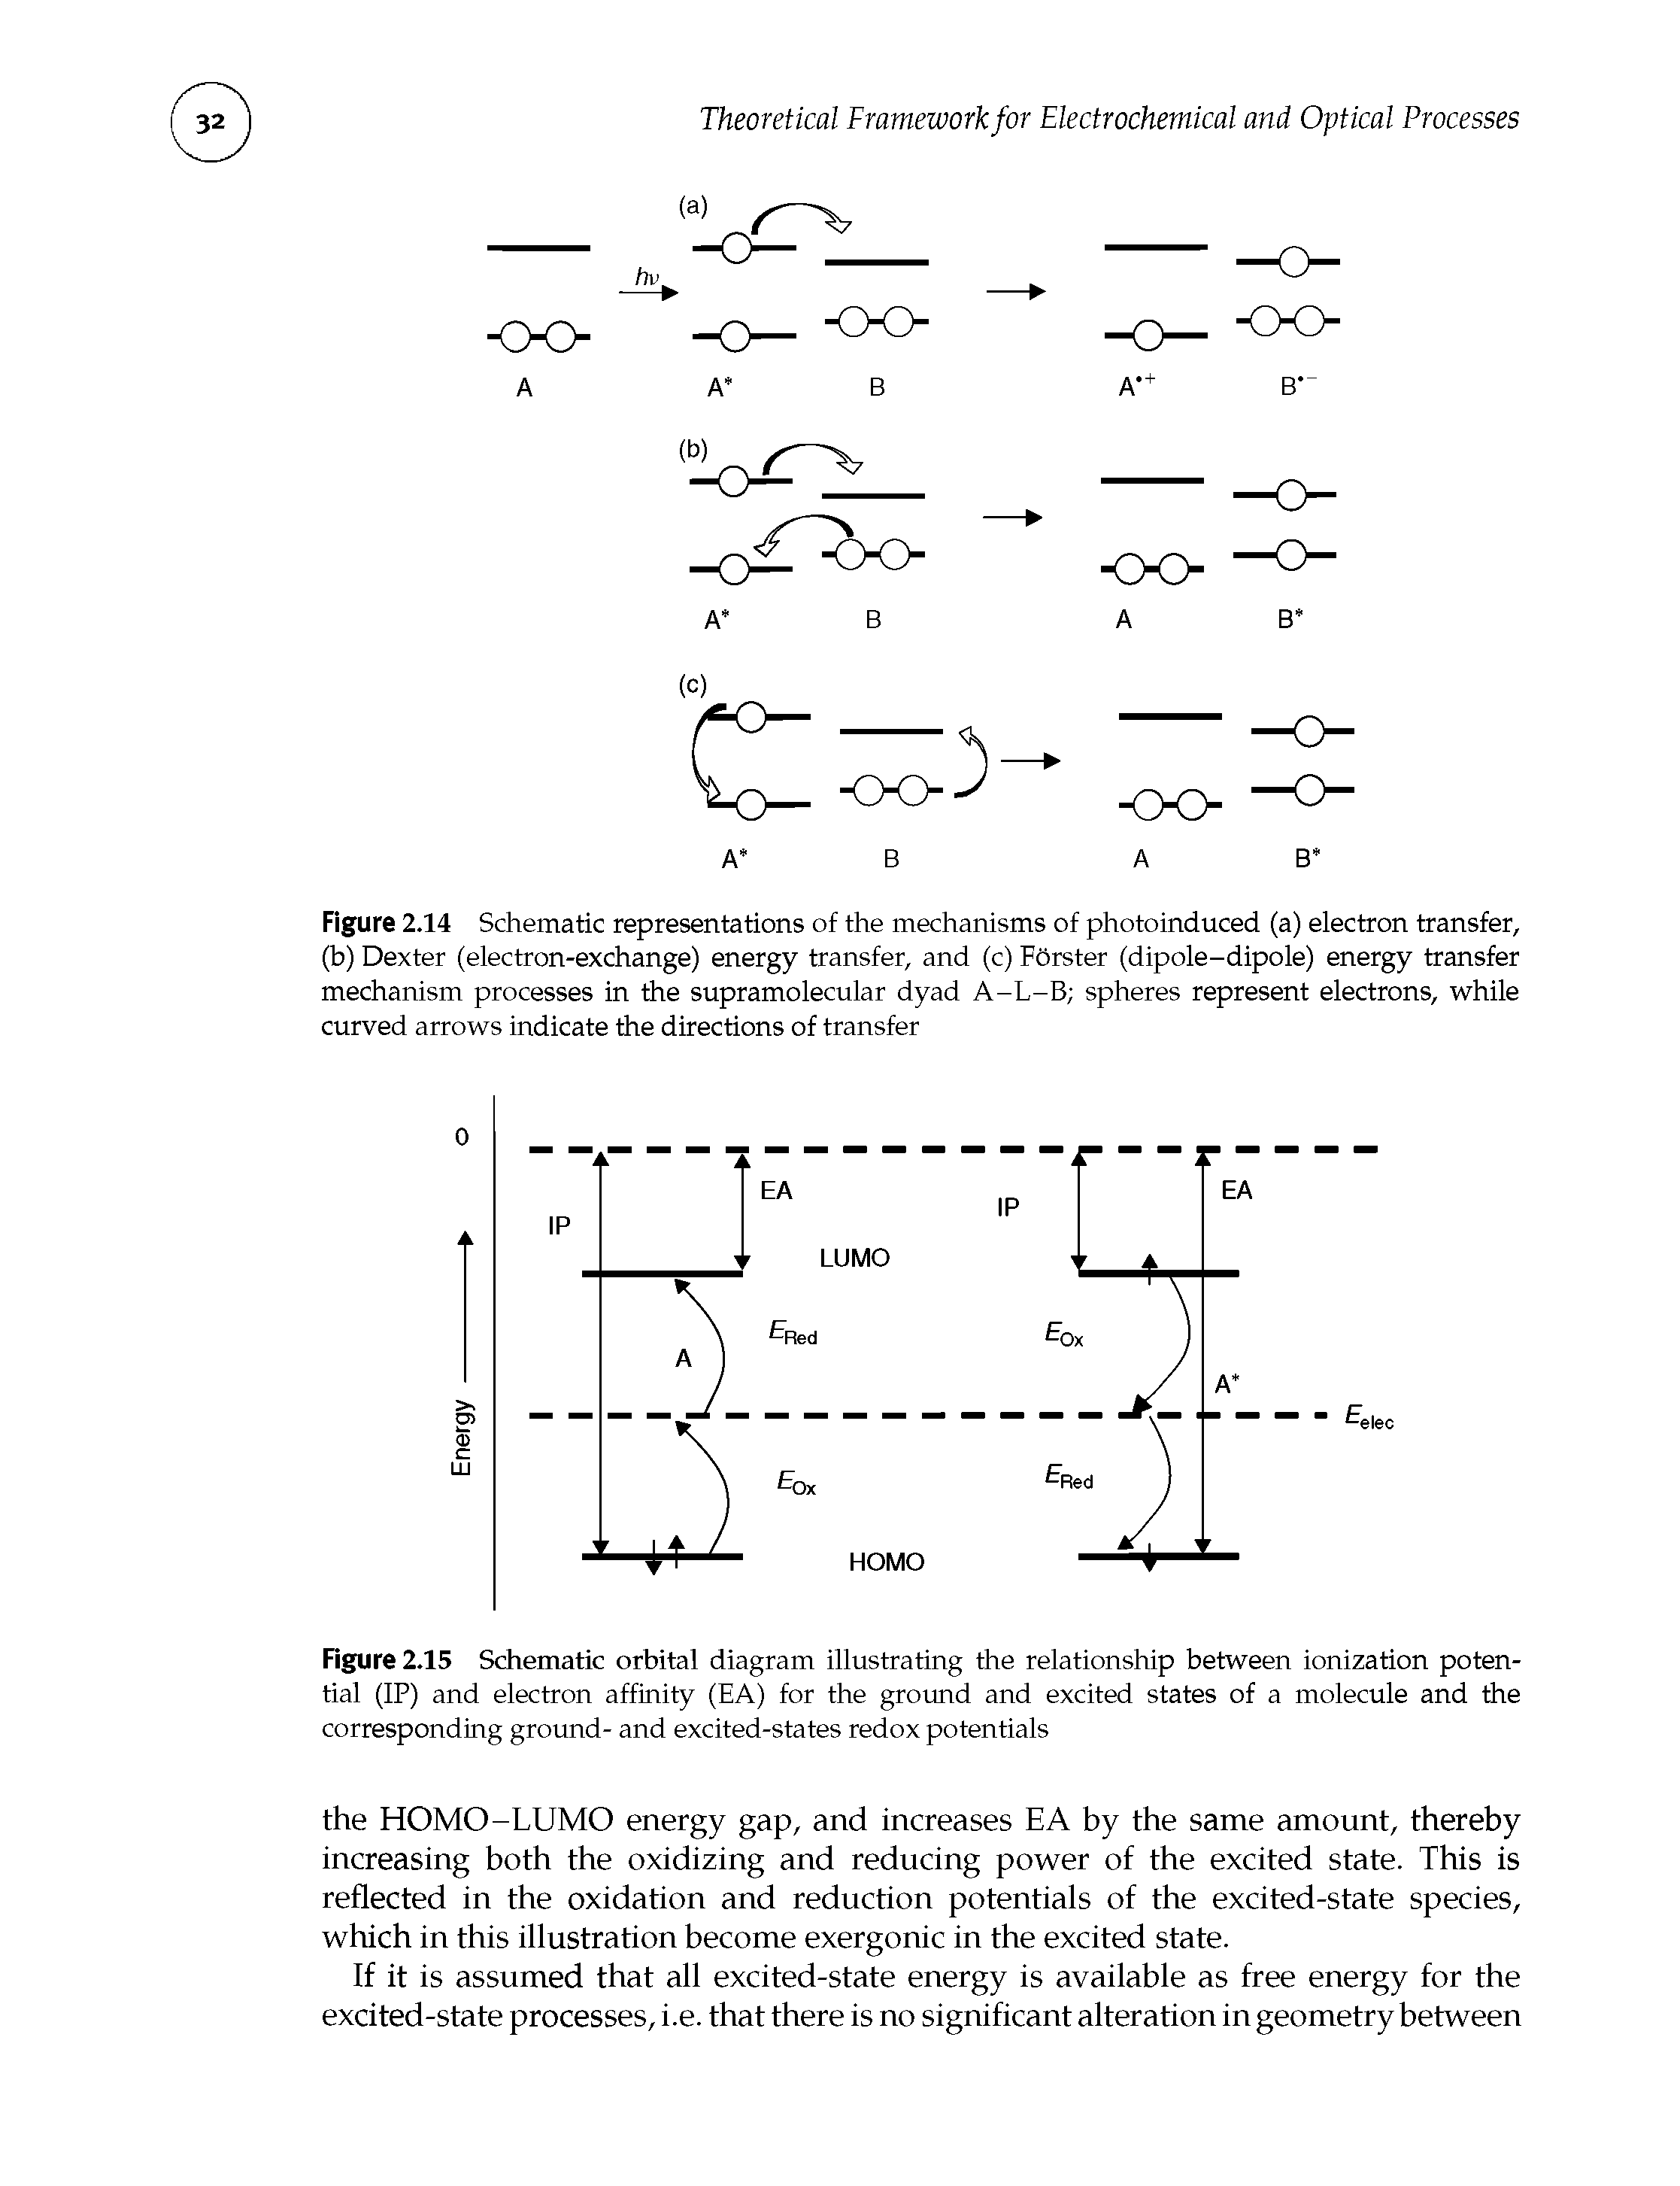 Figure 2.15 Schematic orbital diagram illustrating the relationship between ionization potential (IP) and electron affinity (EA) for the ground and excited states of a molecule and the corresponding ground- and excited-states redox potentials...